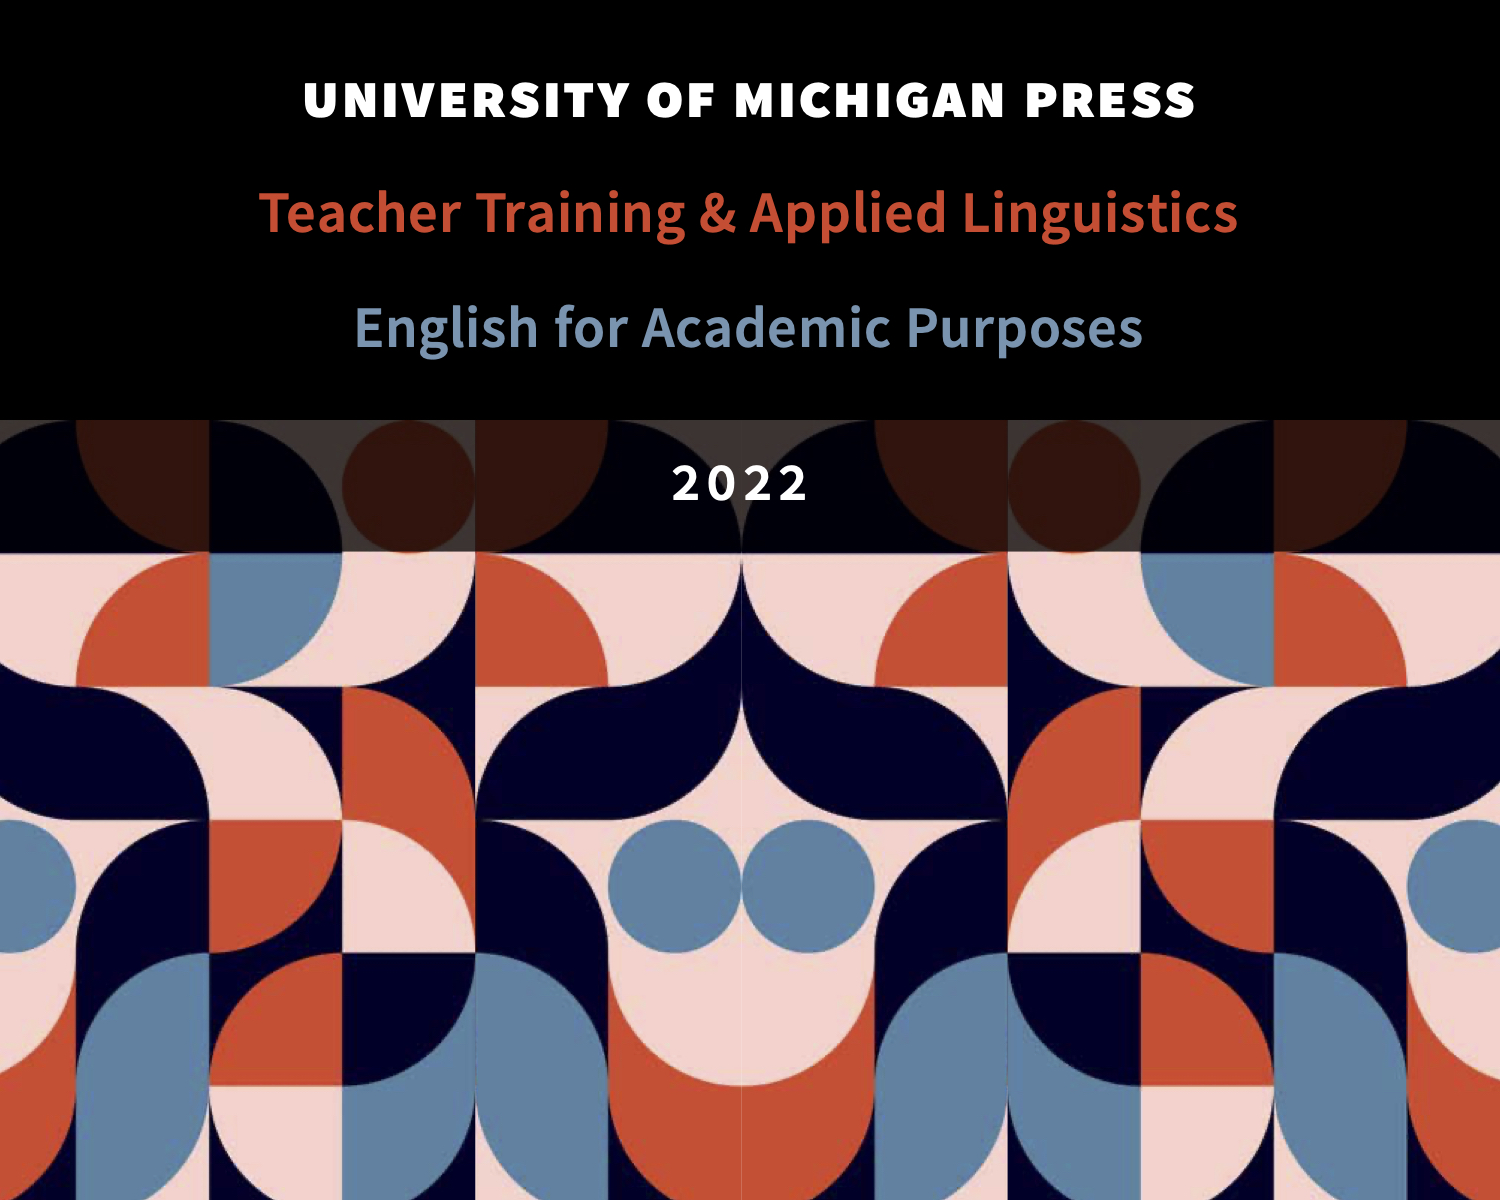 University of Michigan 2022 ELT Catalog for Teacher Training & Applied Linguistics and English for Academic Purposes